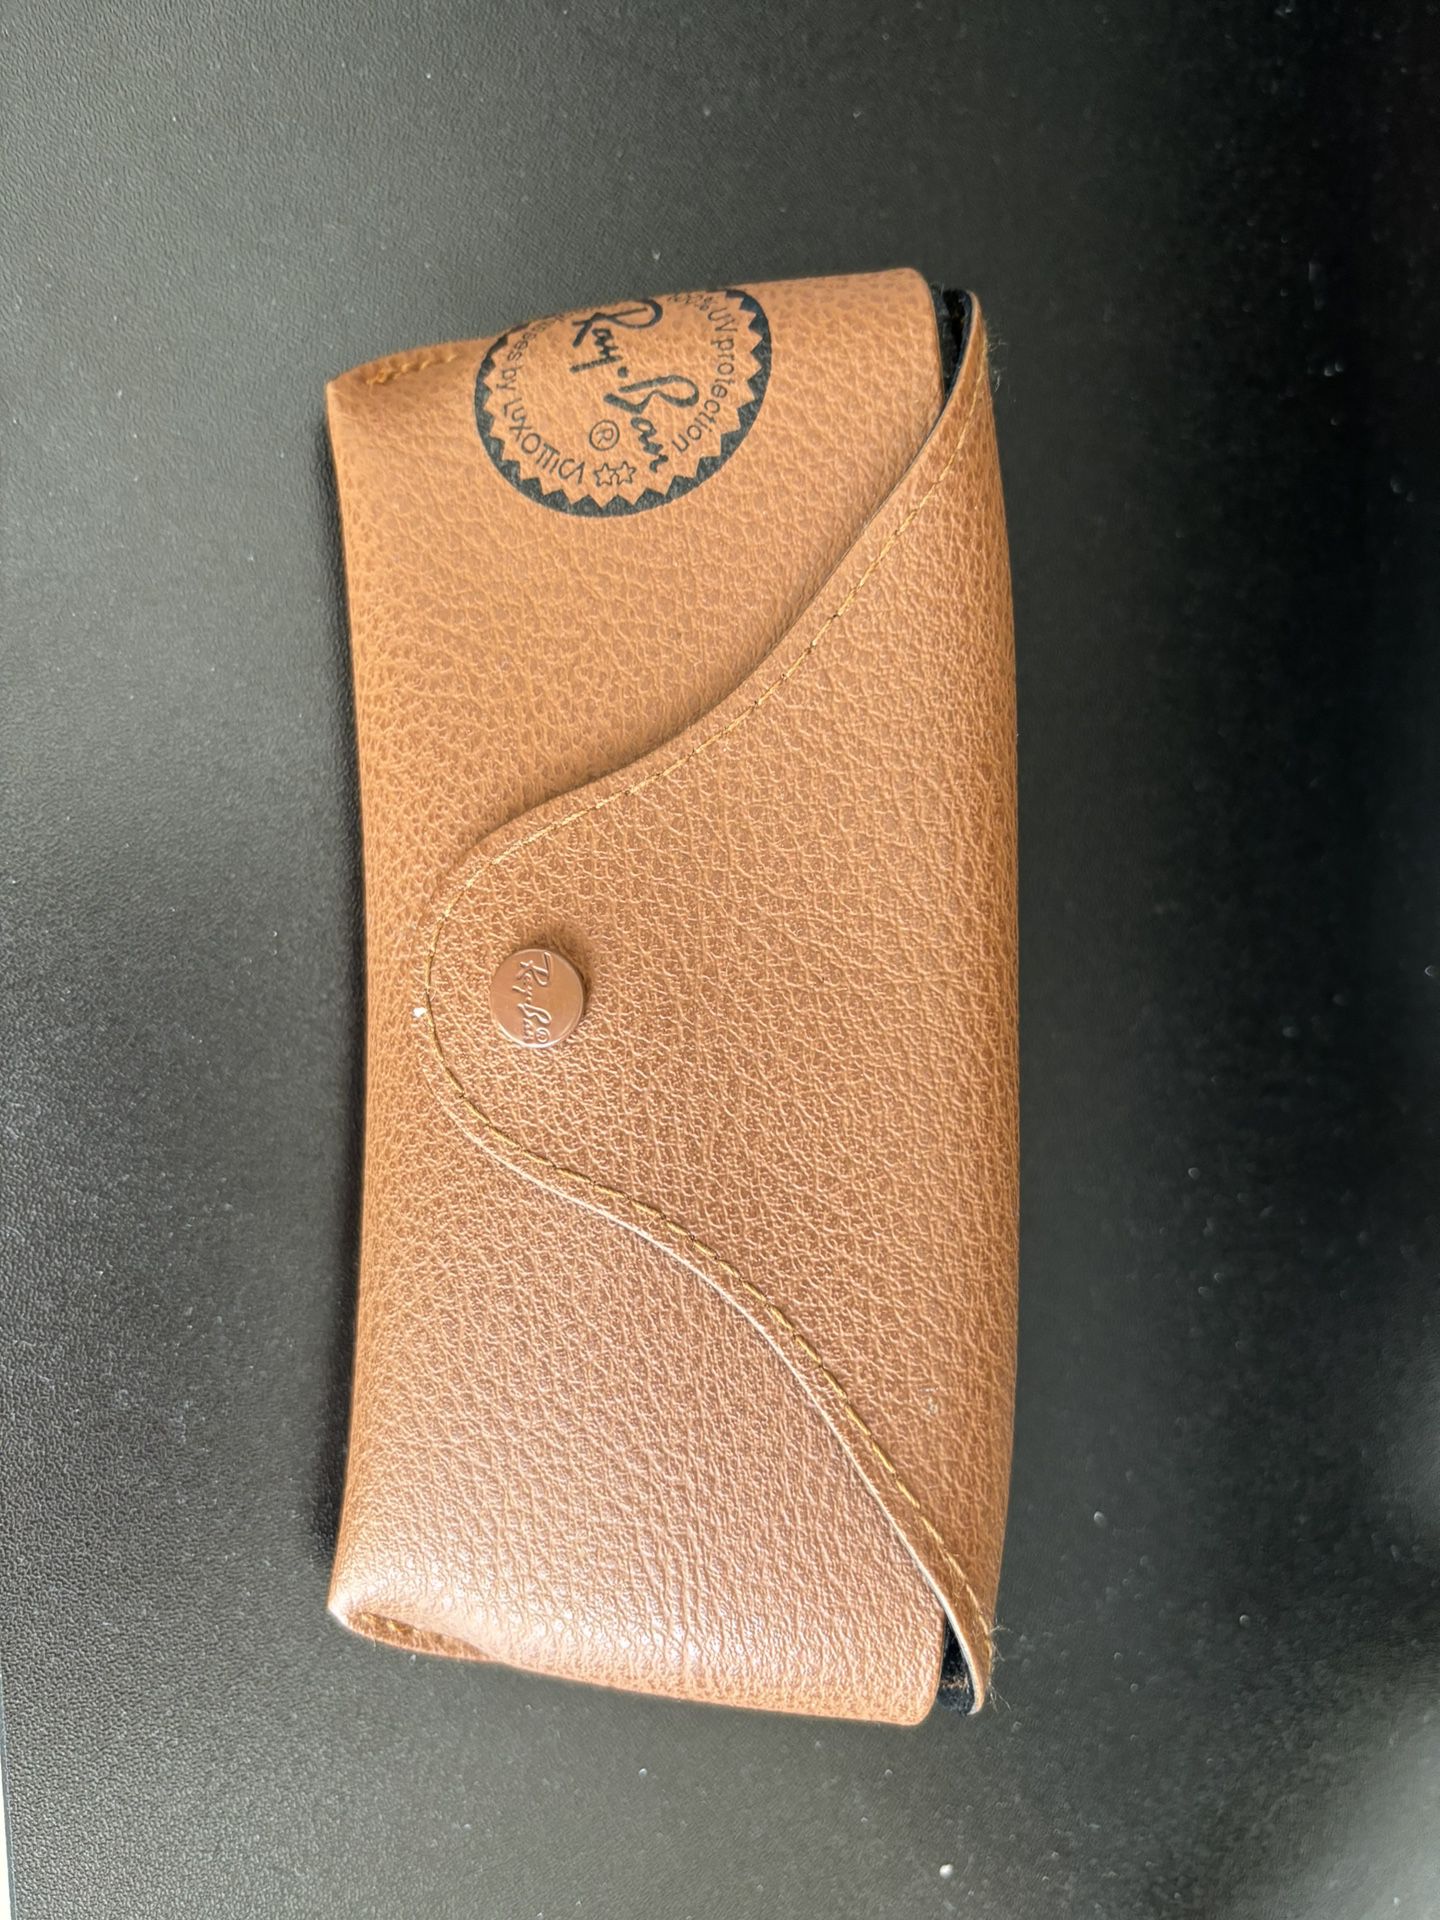 Ray-Ban Glasses case